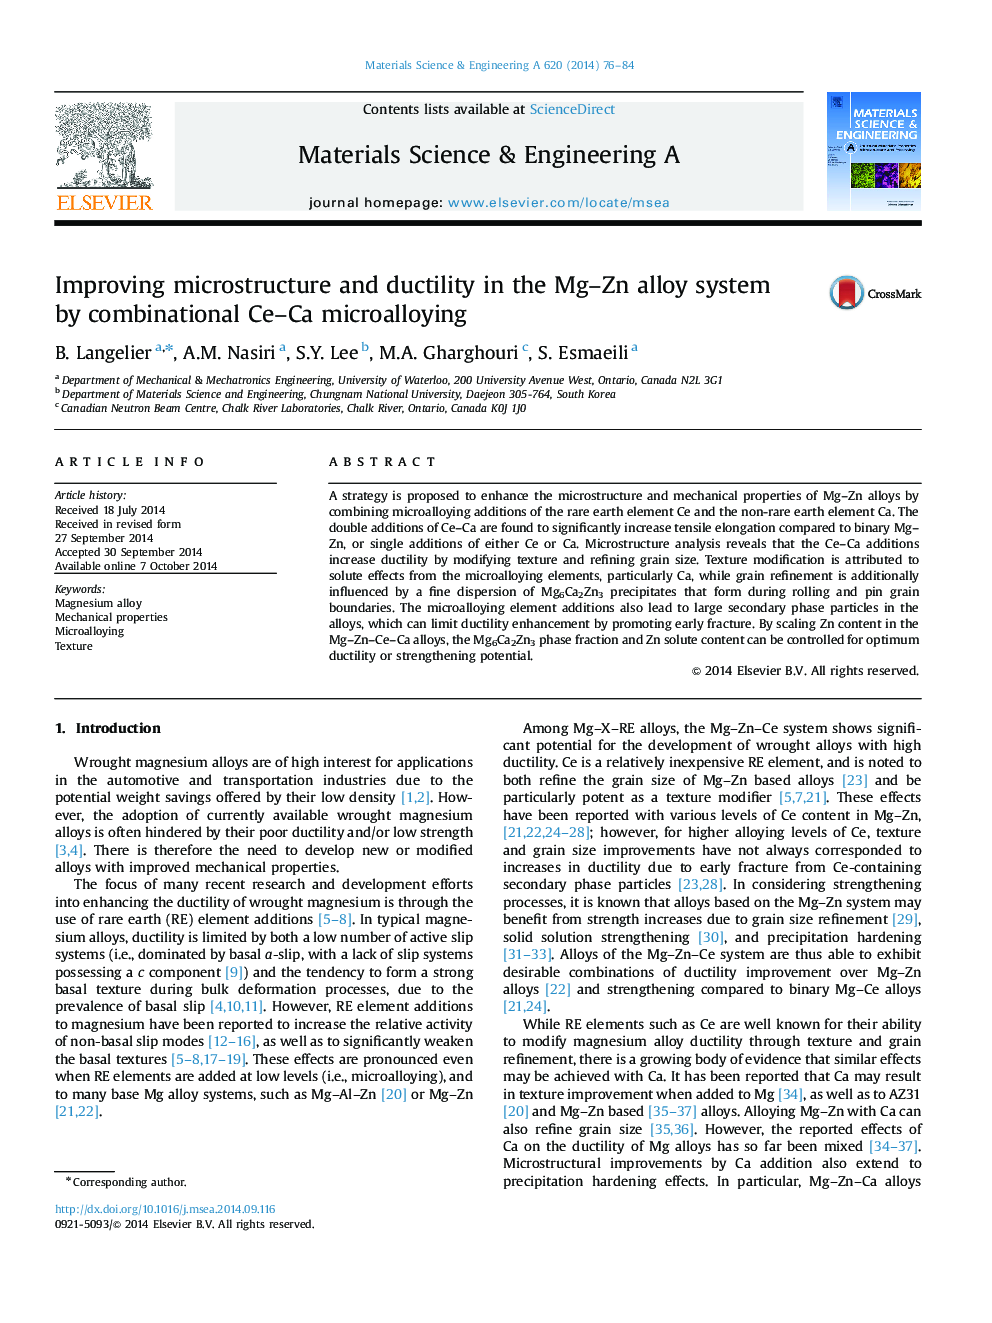 Improving microstructure and ductility in the Mg-Zn alloy system by combinational Ce-Ca microalloying